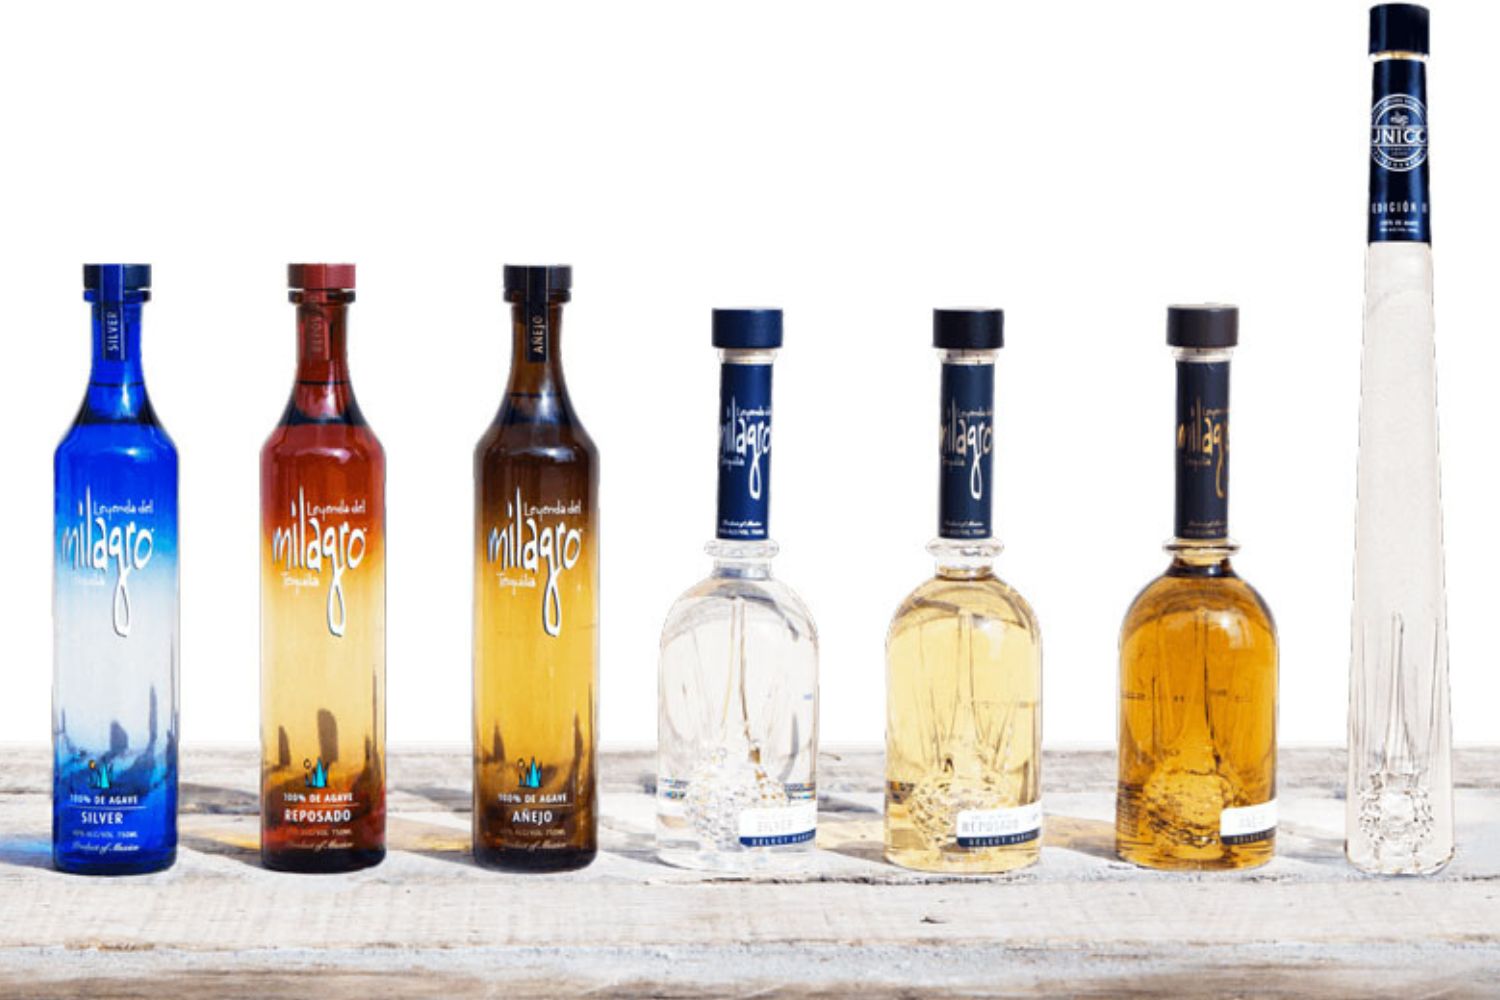 11-captivating-facts-about-milagro-tequila